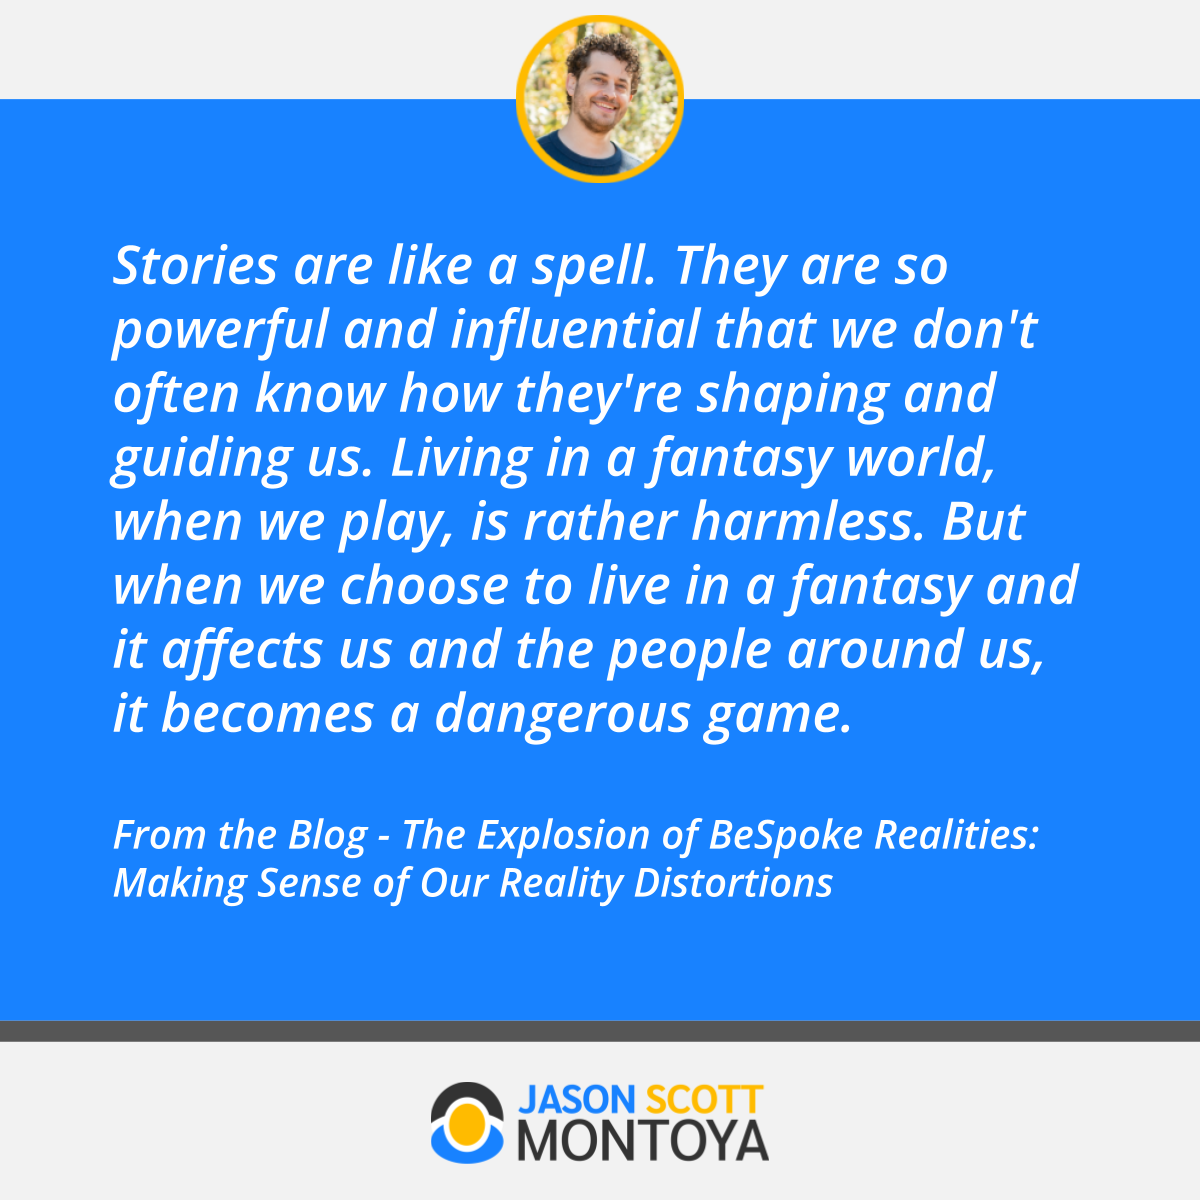 Stories are like a spell. They are so powerful and influential that we don't often know how they're shaping and guiding us. Living in a fantasy world, when we play, is rather harmless. But when we choose to live in a fantasy and it affects us and the people around us, it becomes a dangerous game.  From the Blog - The Explosion of BeSpoke Realities: Making Sense of Our Reality Distortions